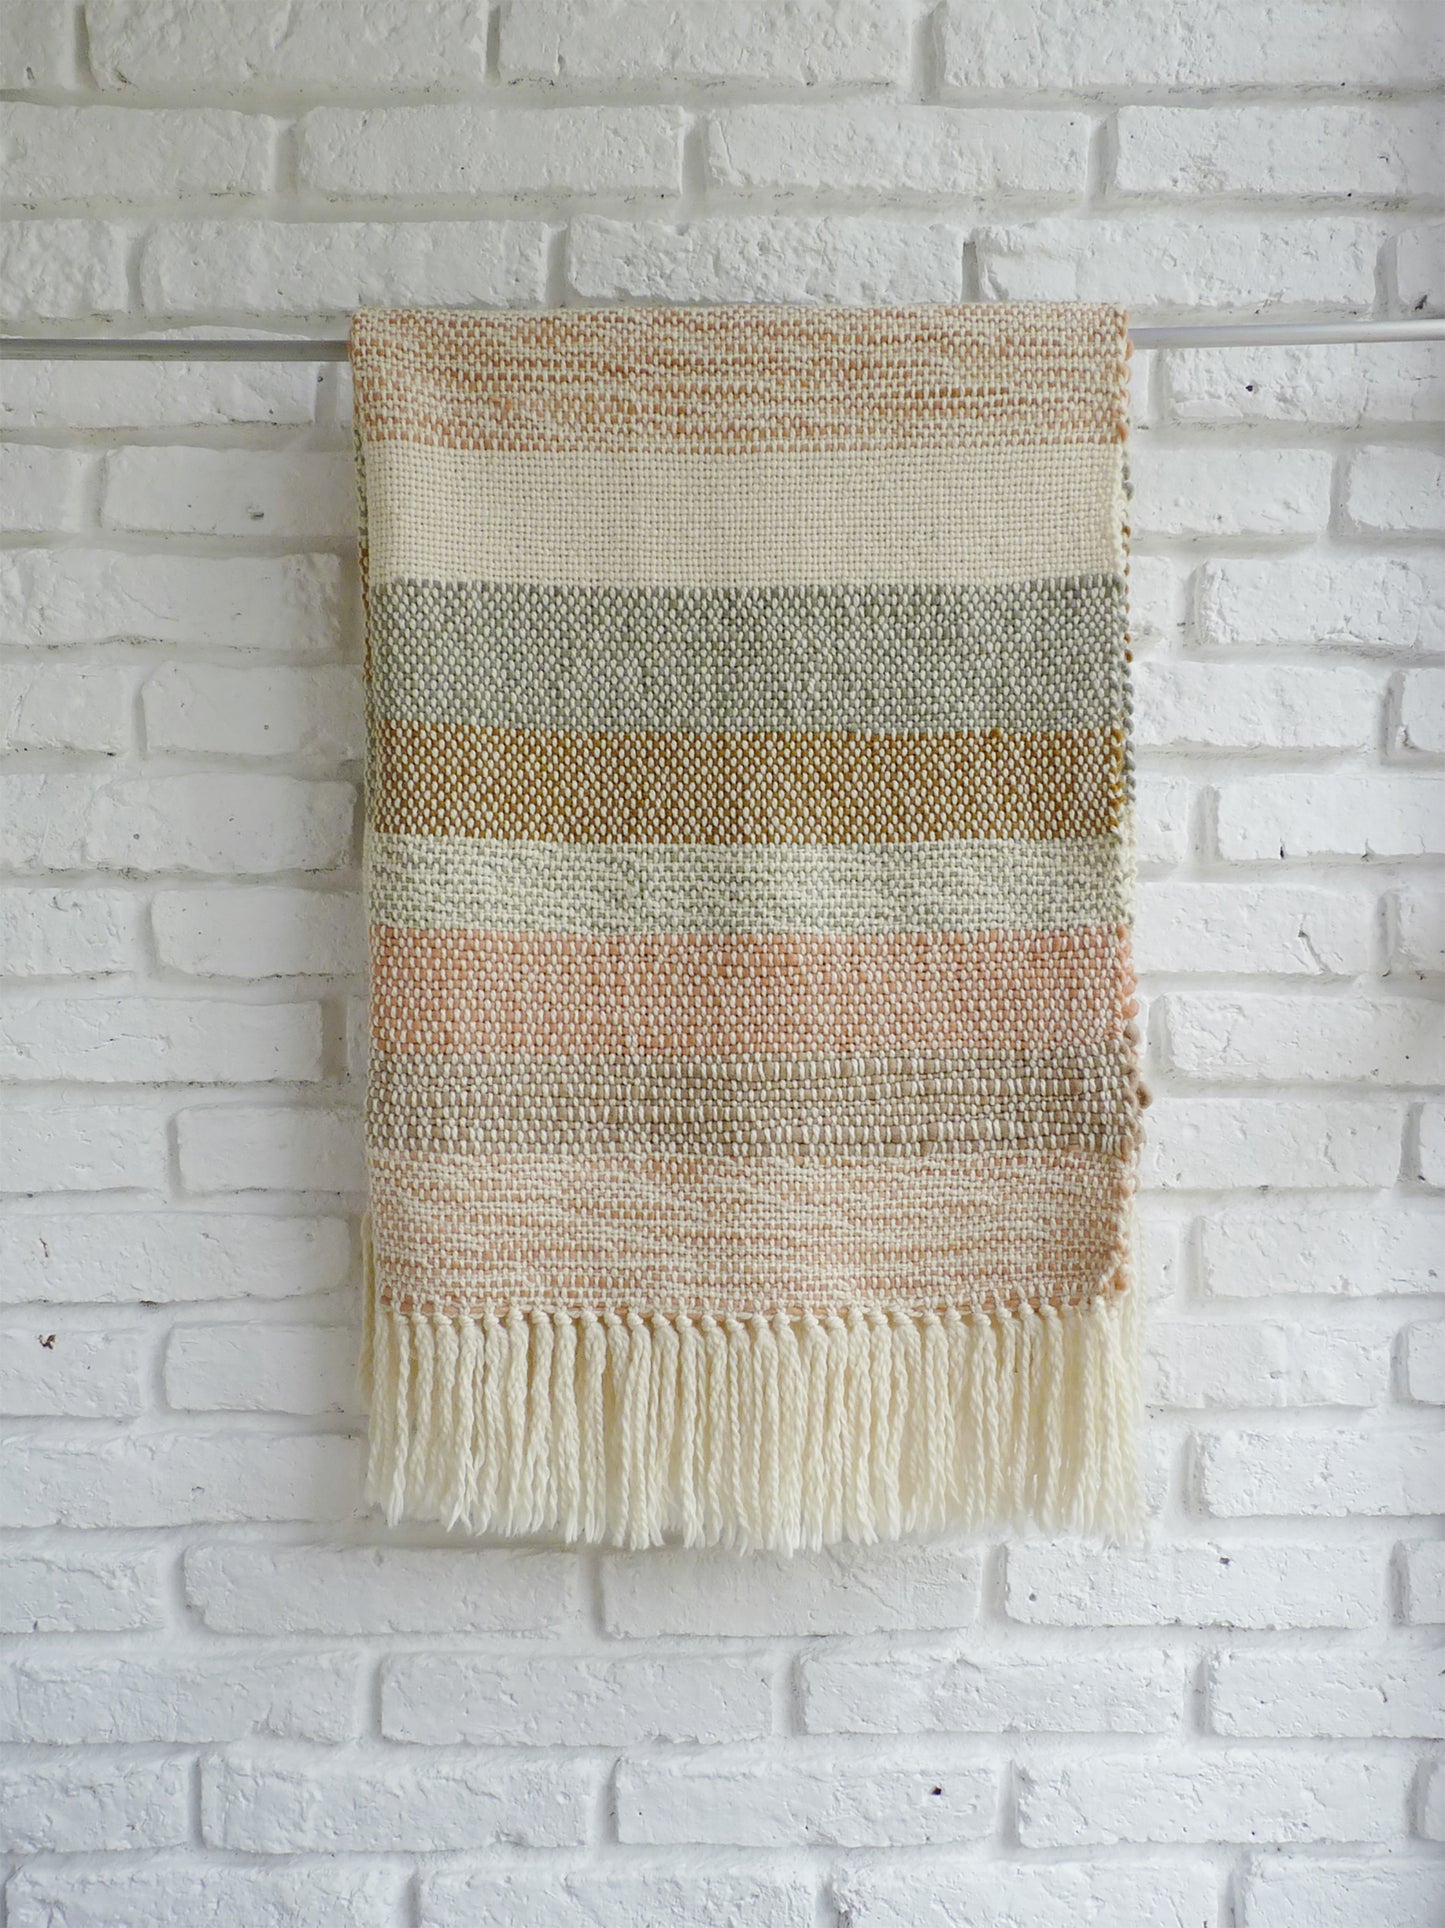 Handwoven Merino Wool Throw - Add a Touch of Artisanal Elegance to Your Home Decor - Sustainable and Eco-Friendly Blanket